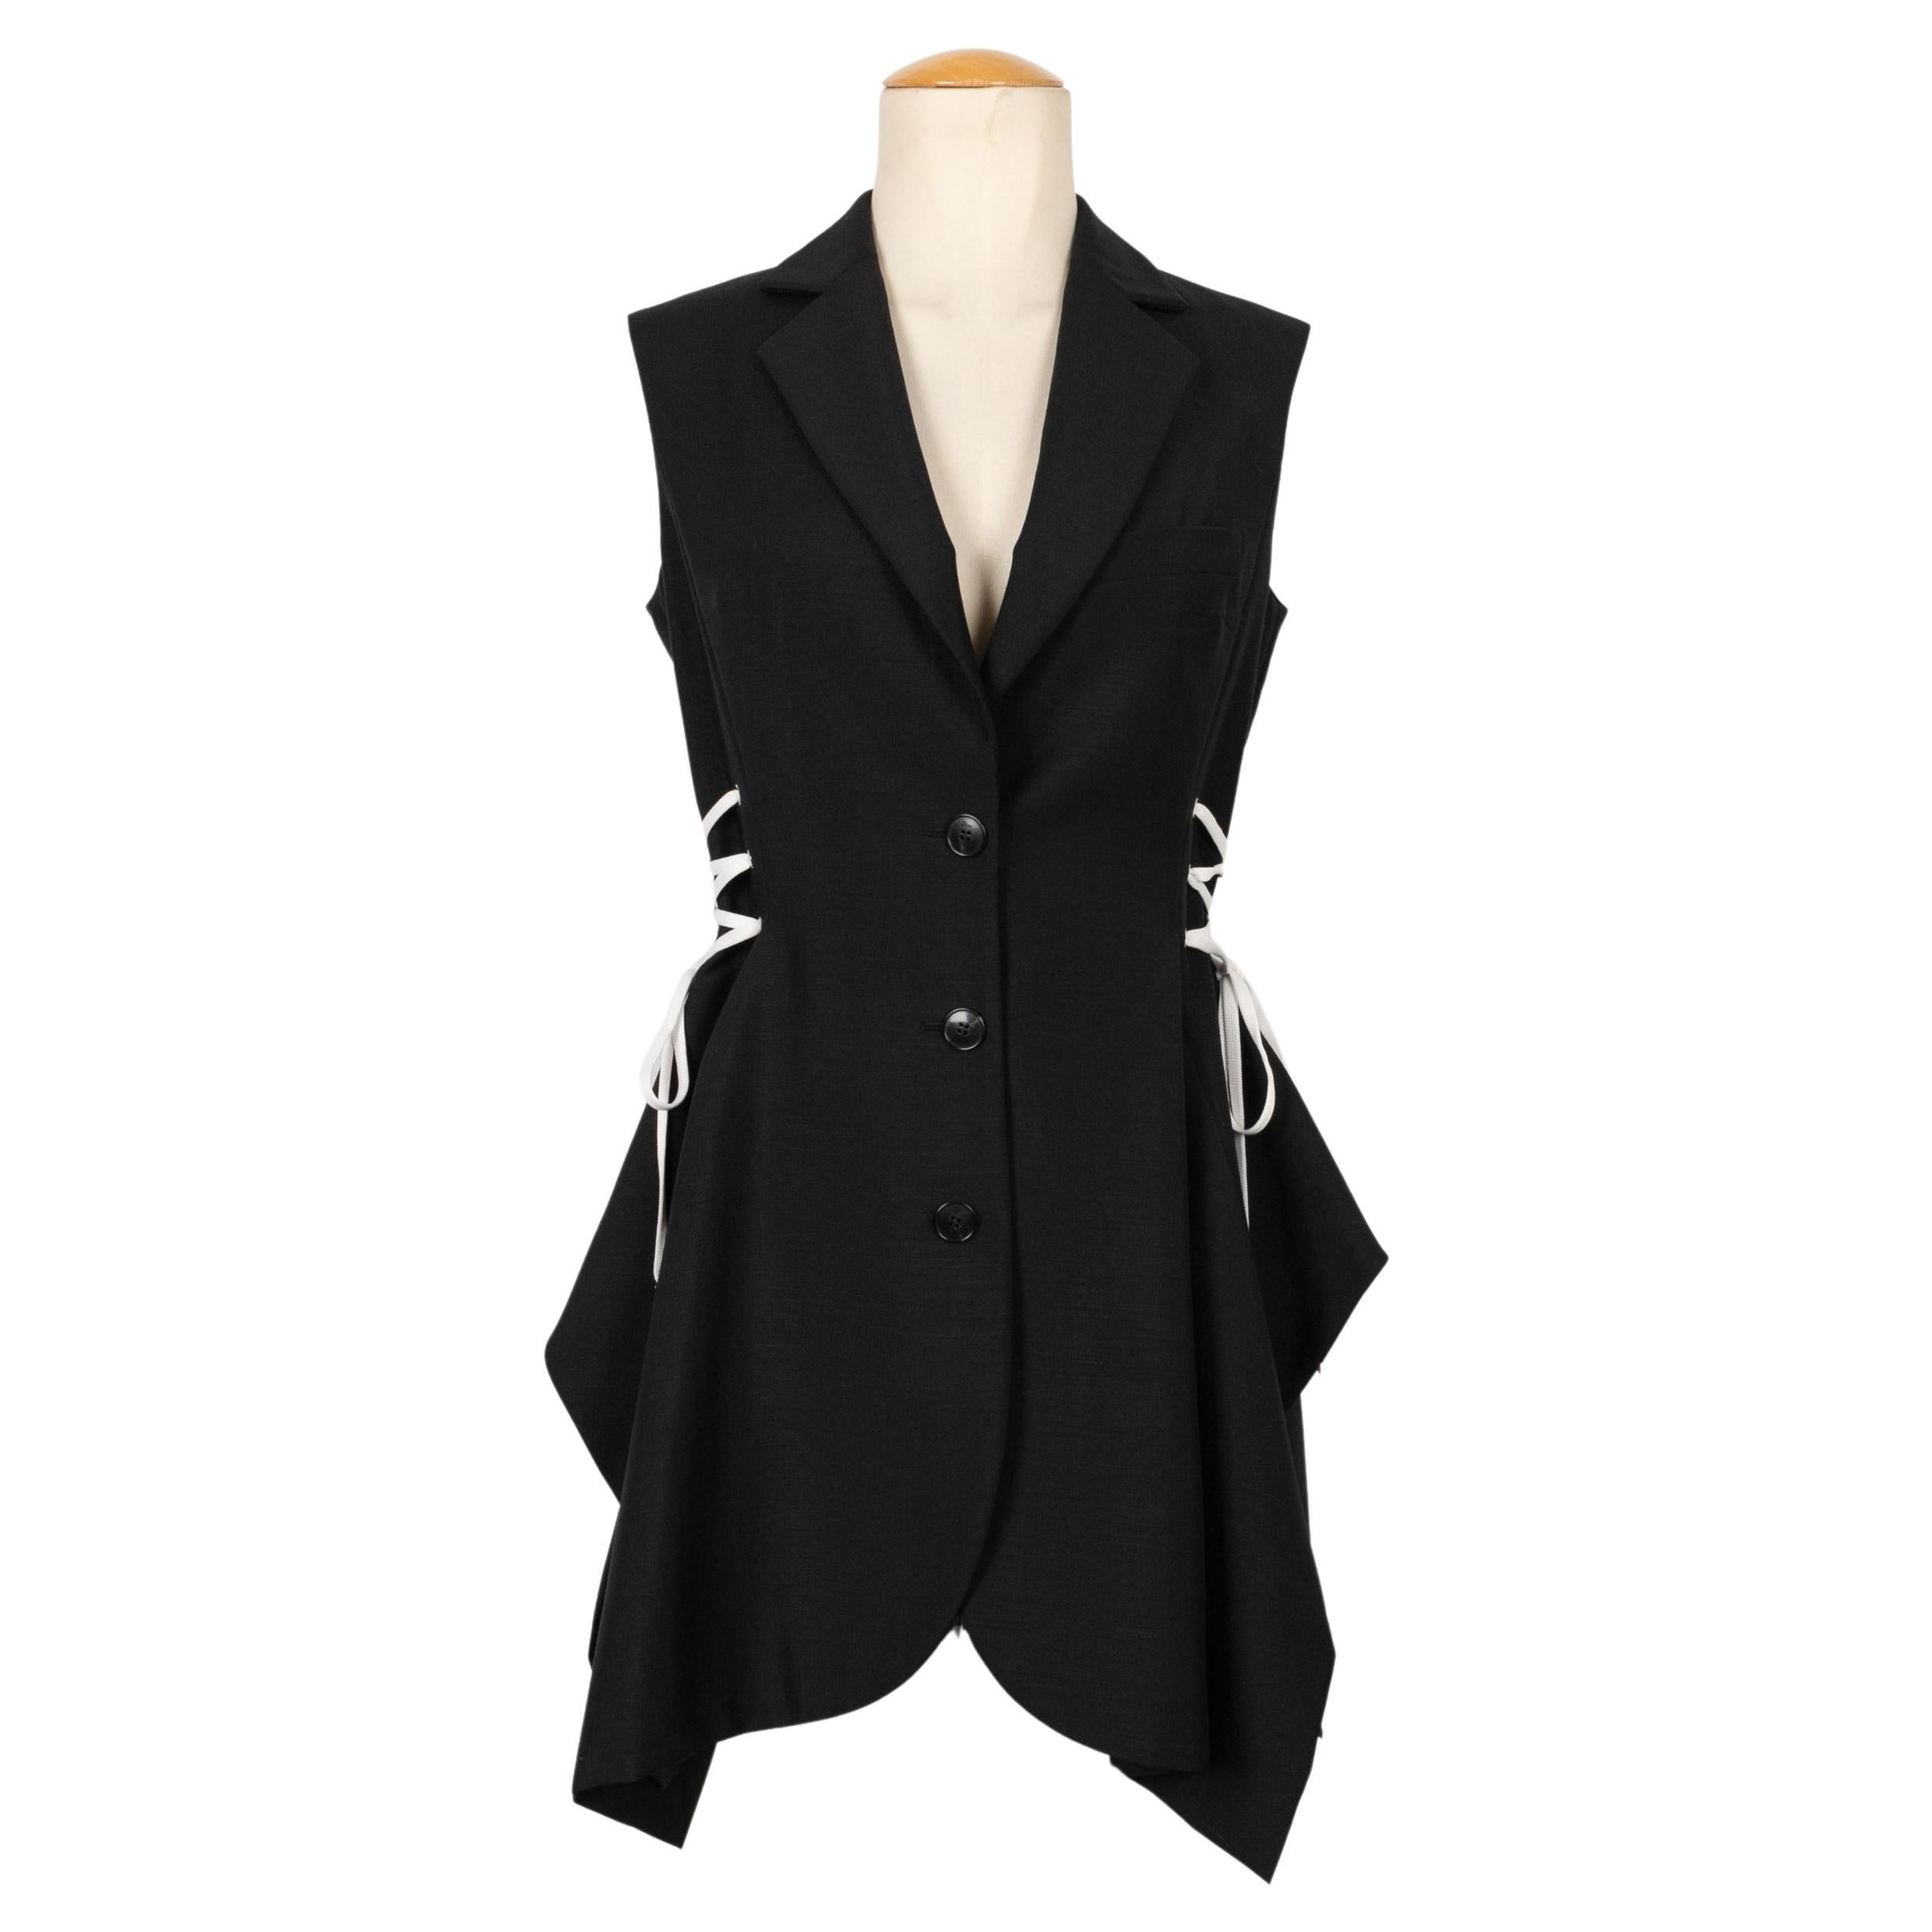 Christian Dior Black Wool and Mohair Jacket-Style Dress For Sale